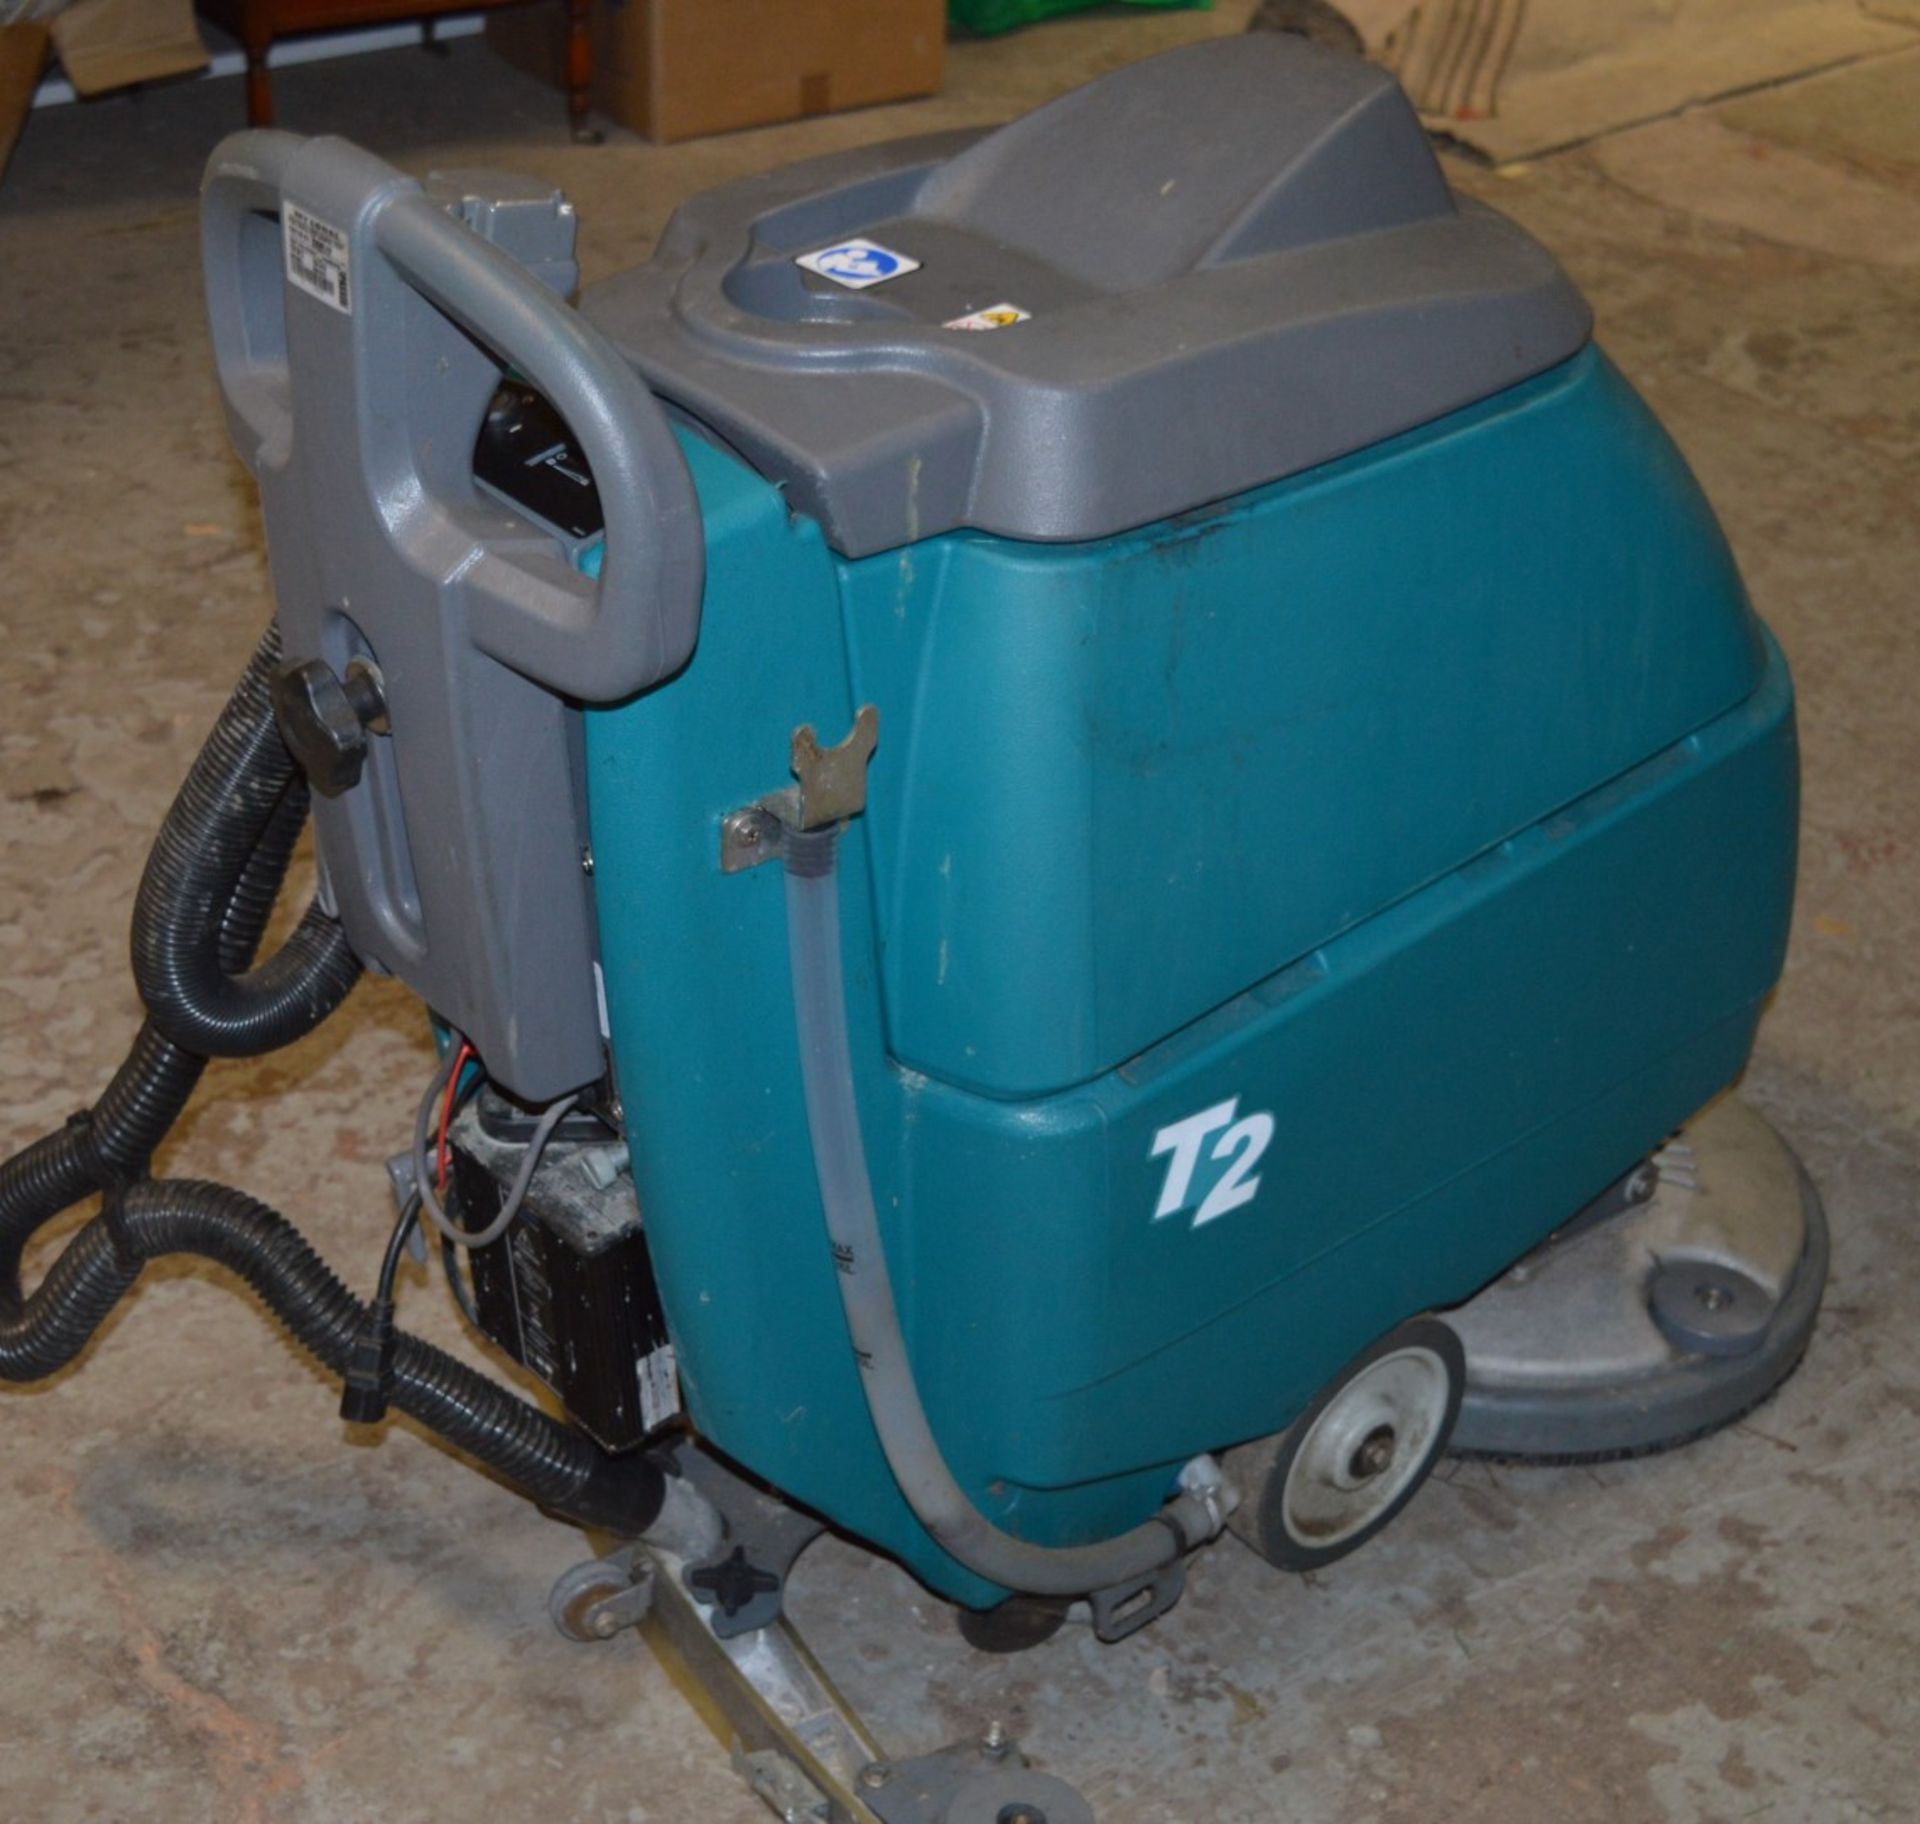 1 x Tennant T2 Mid-Size Walk-Behind Floor Scrubber - Supplied Keys and Spare Accessories - Ref: - Image 6 of 8